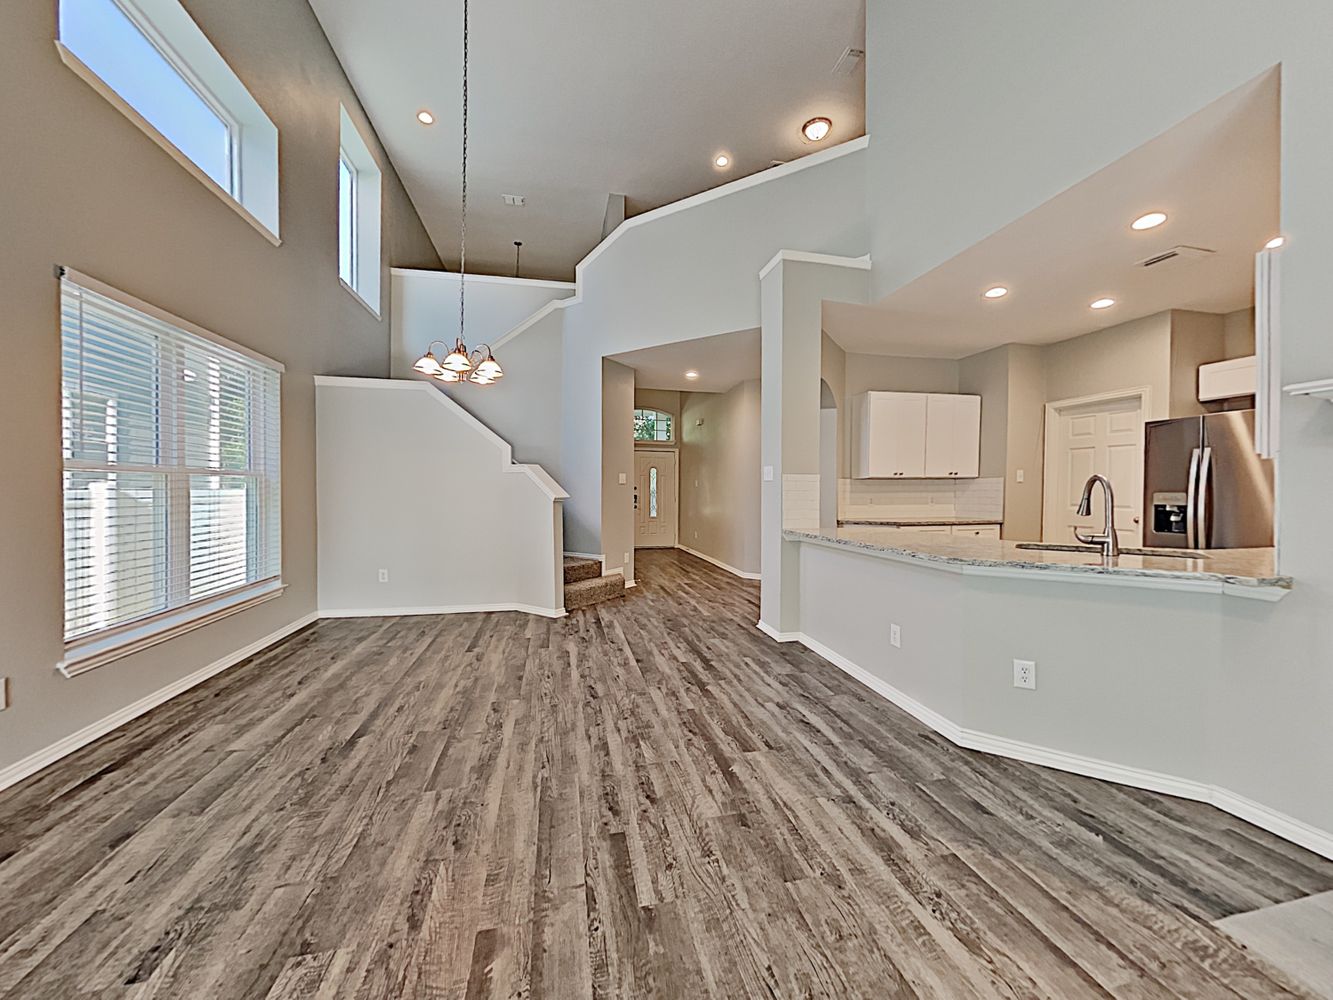 Large family room with luxury vinyl plank flooring and easy access to the kitchen at Invitation Homes Houston.